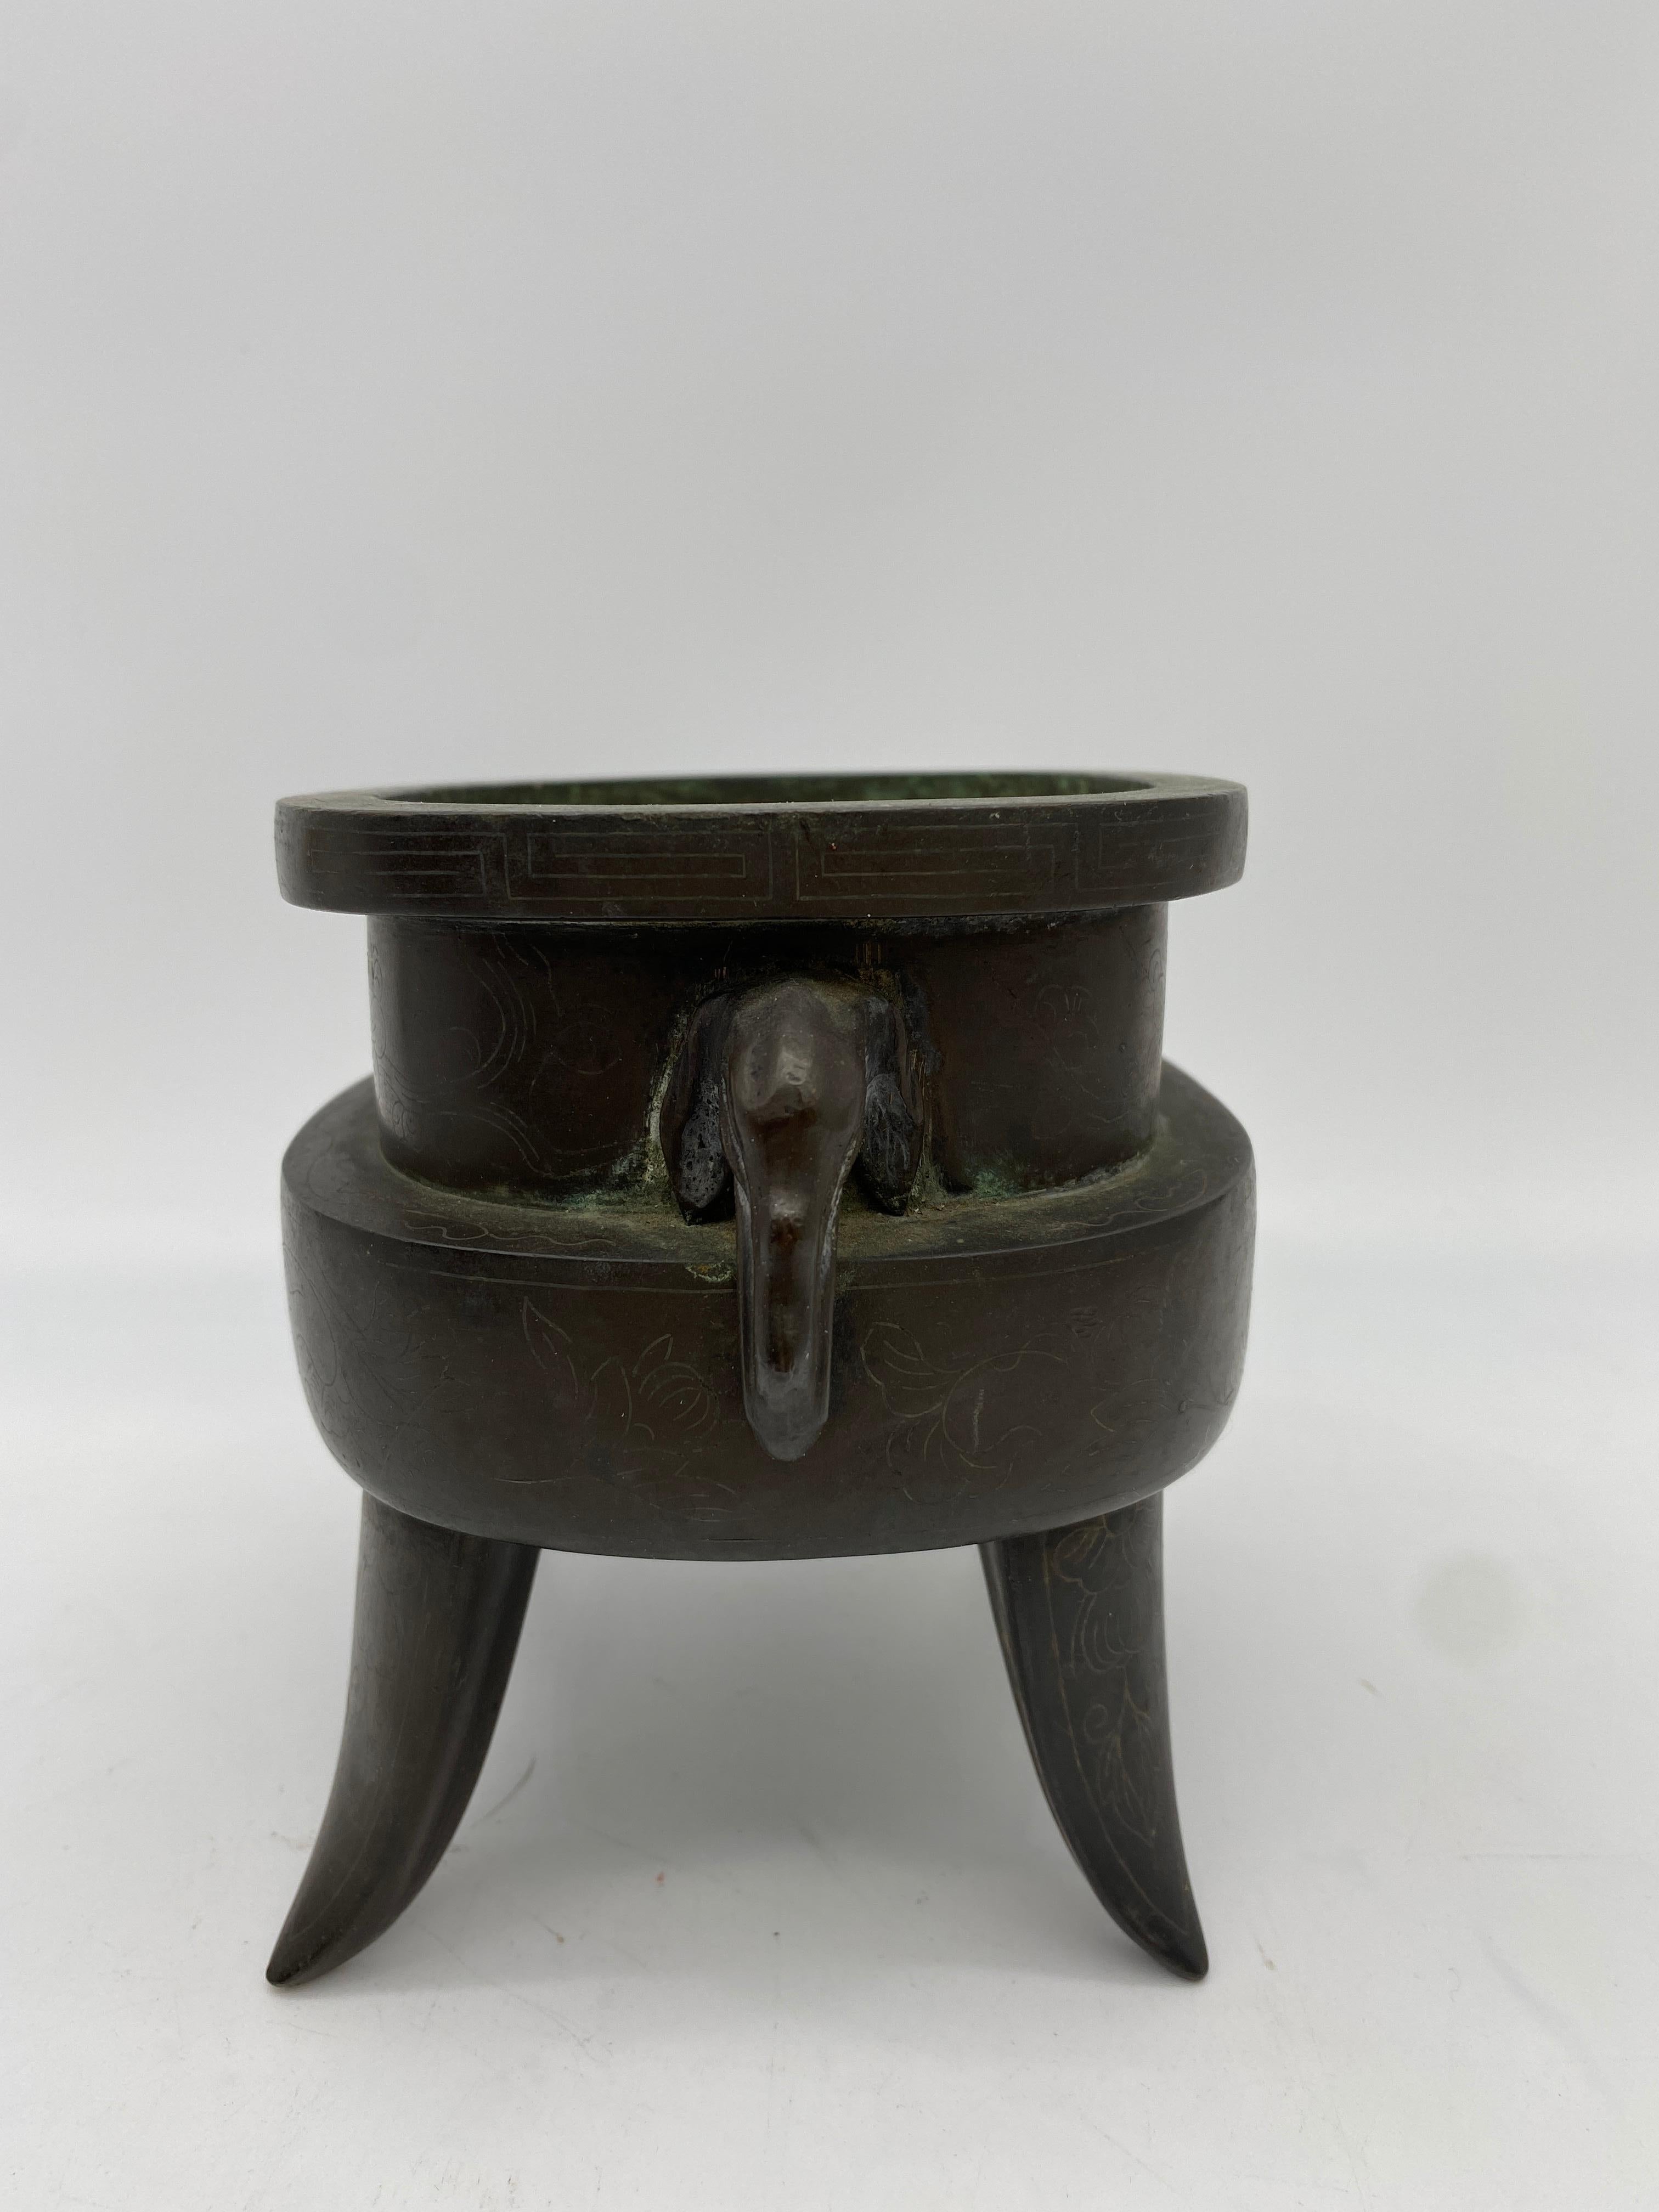 Qing dynasty 18th/19th century Chinese twin handled bronze censer with elephants handles, inlaid with fine silver work, 15cm x 11cm.